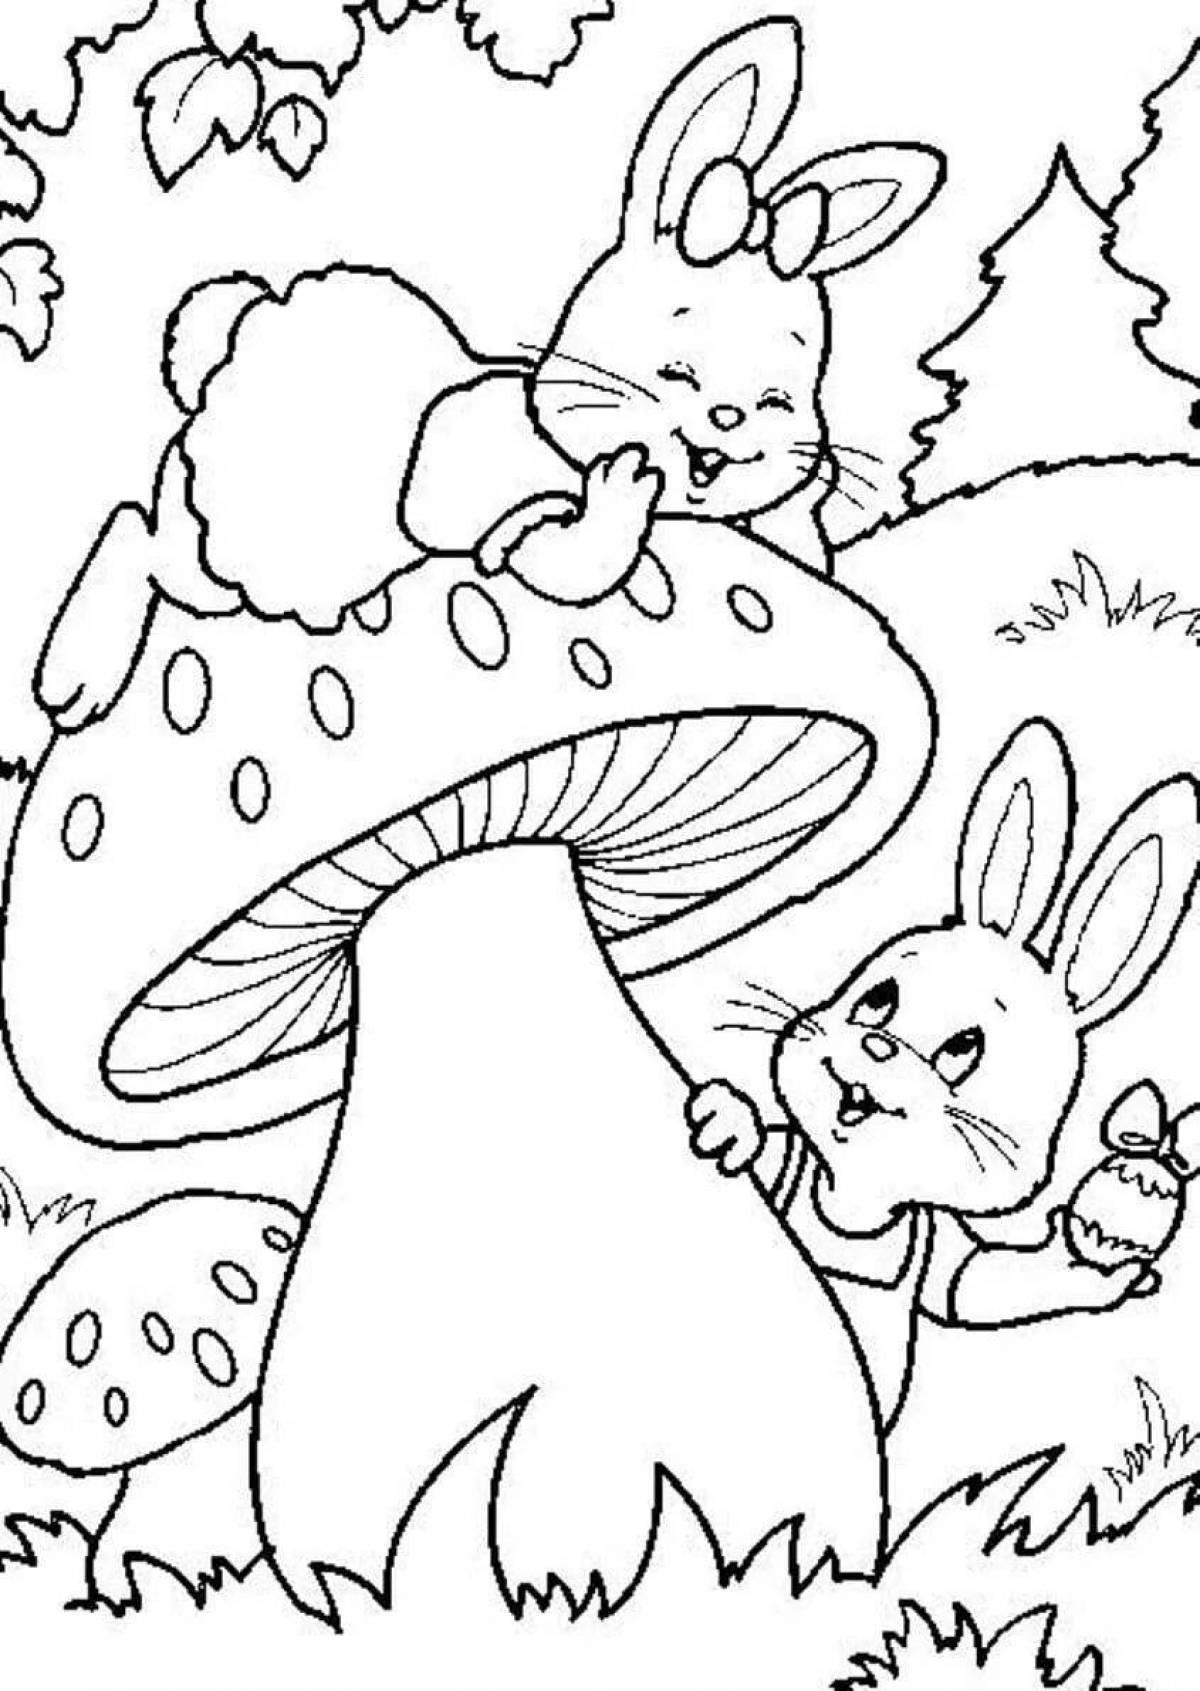 Incredible hare coloring book for 6-7 year olds